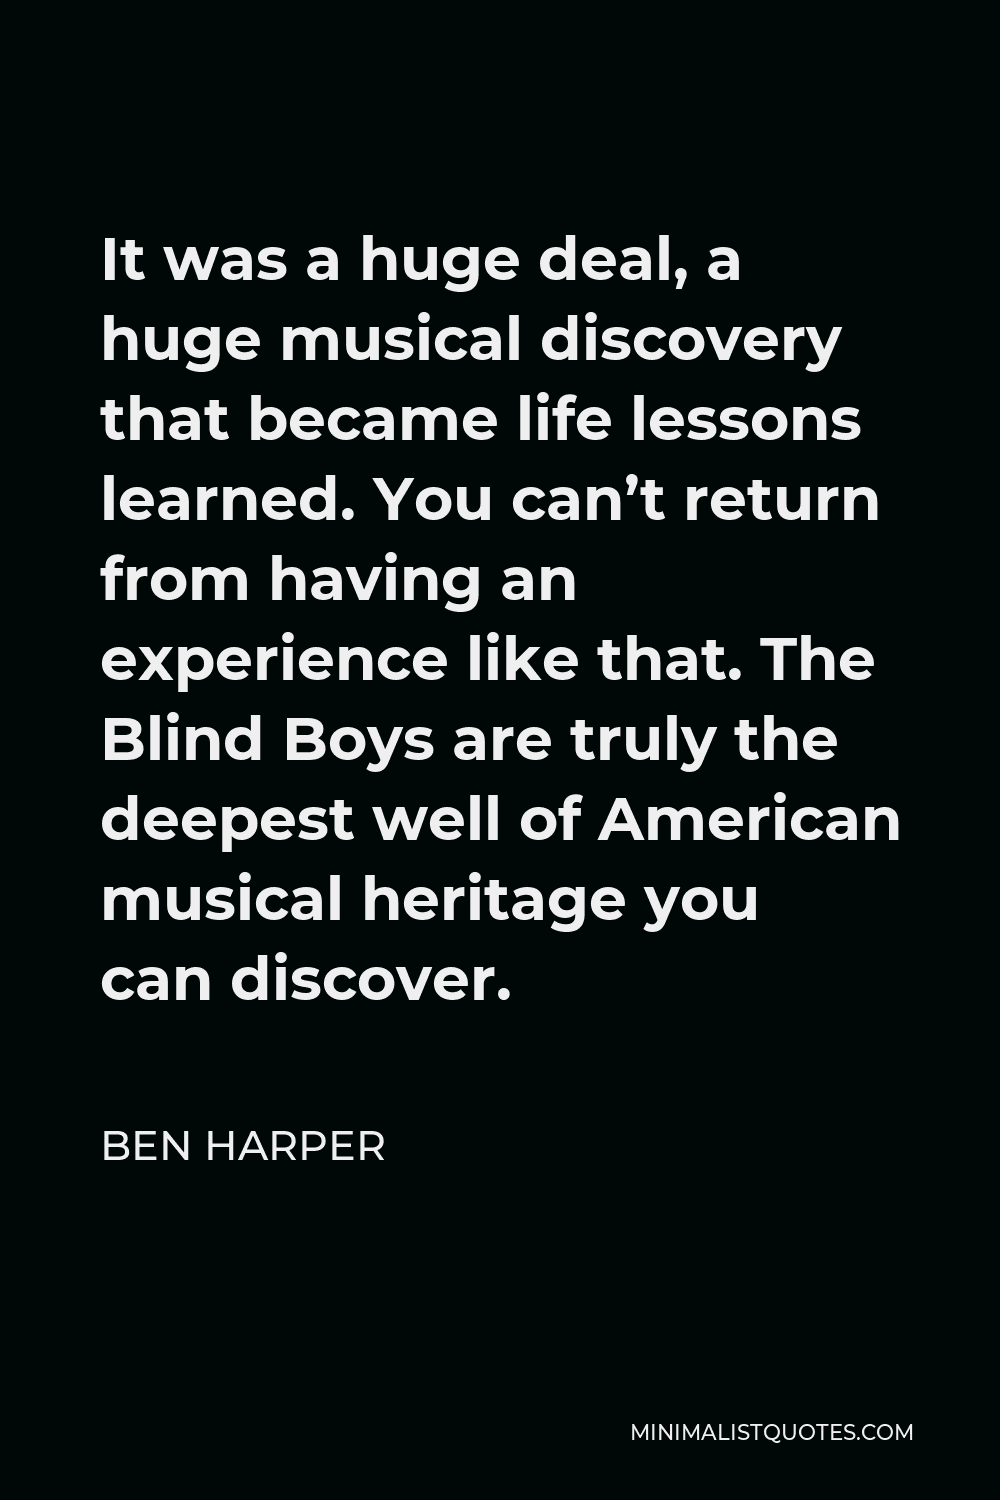 Ben Harper Quote - It was a huge deal, a huge musical discovery that became life lessons learned. You can’t return from having an experience like that. The Blind Boys are truly the deepest well of American musical heritage you can discover.